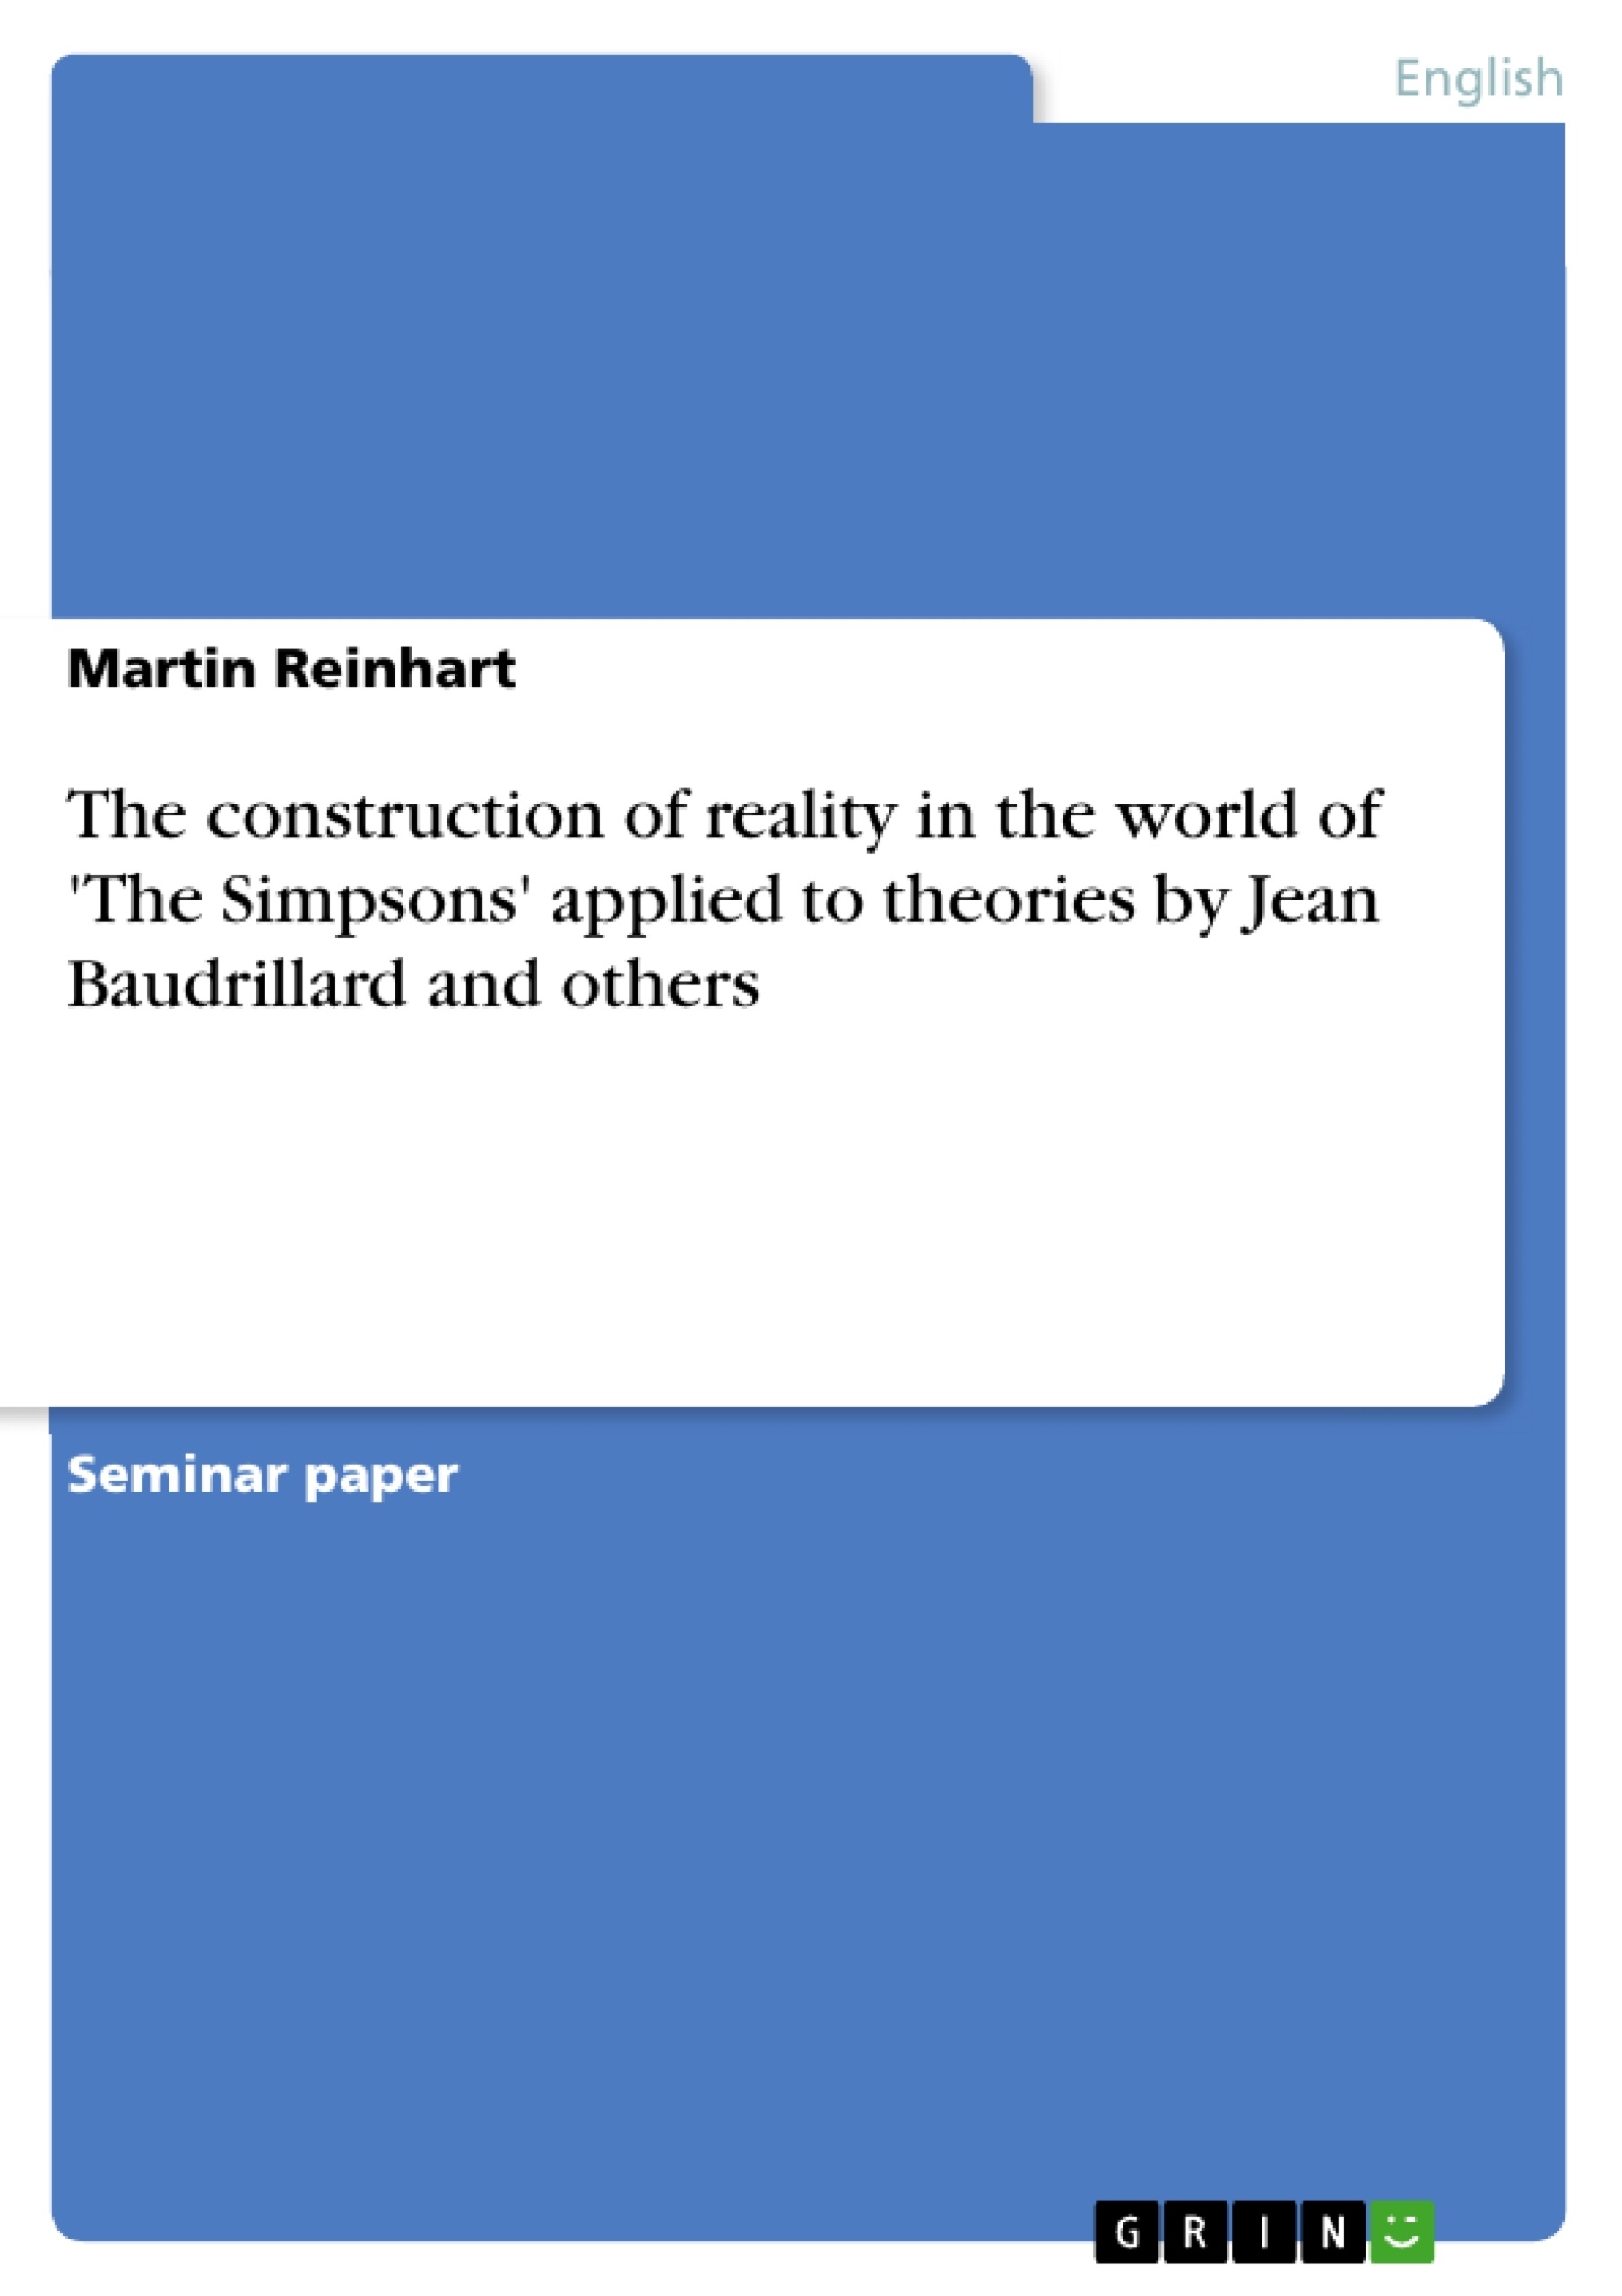 Title: The construction of reality in the world of 'The Simpsons' applied to theories by Jean Baudrillard and others